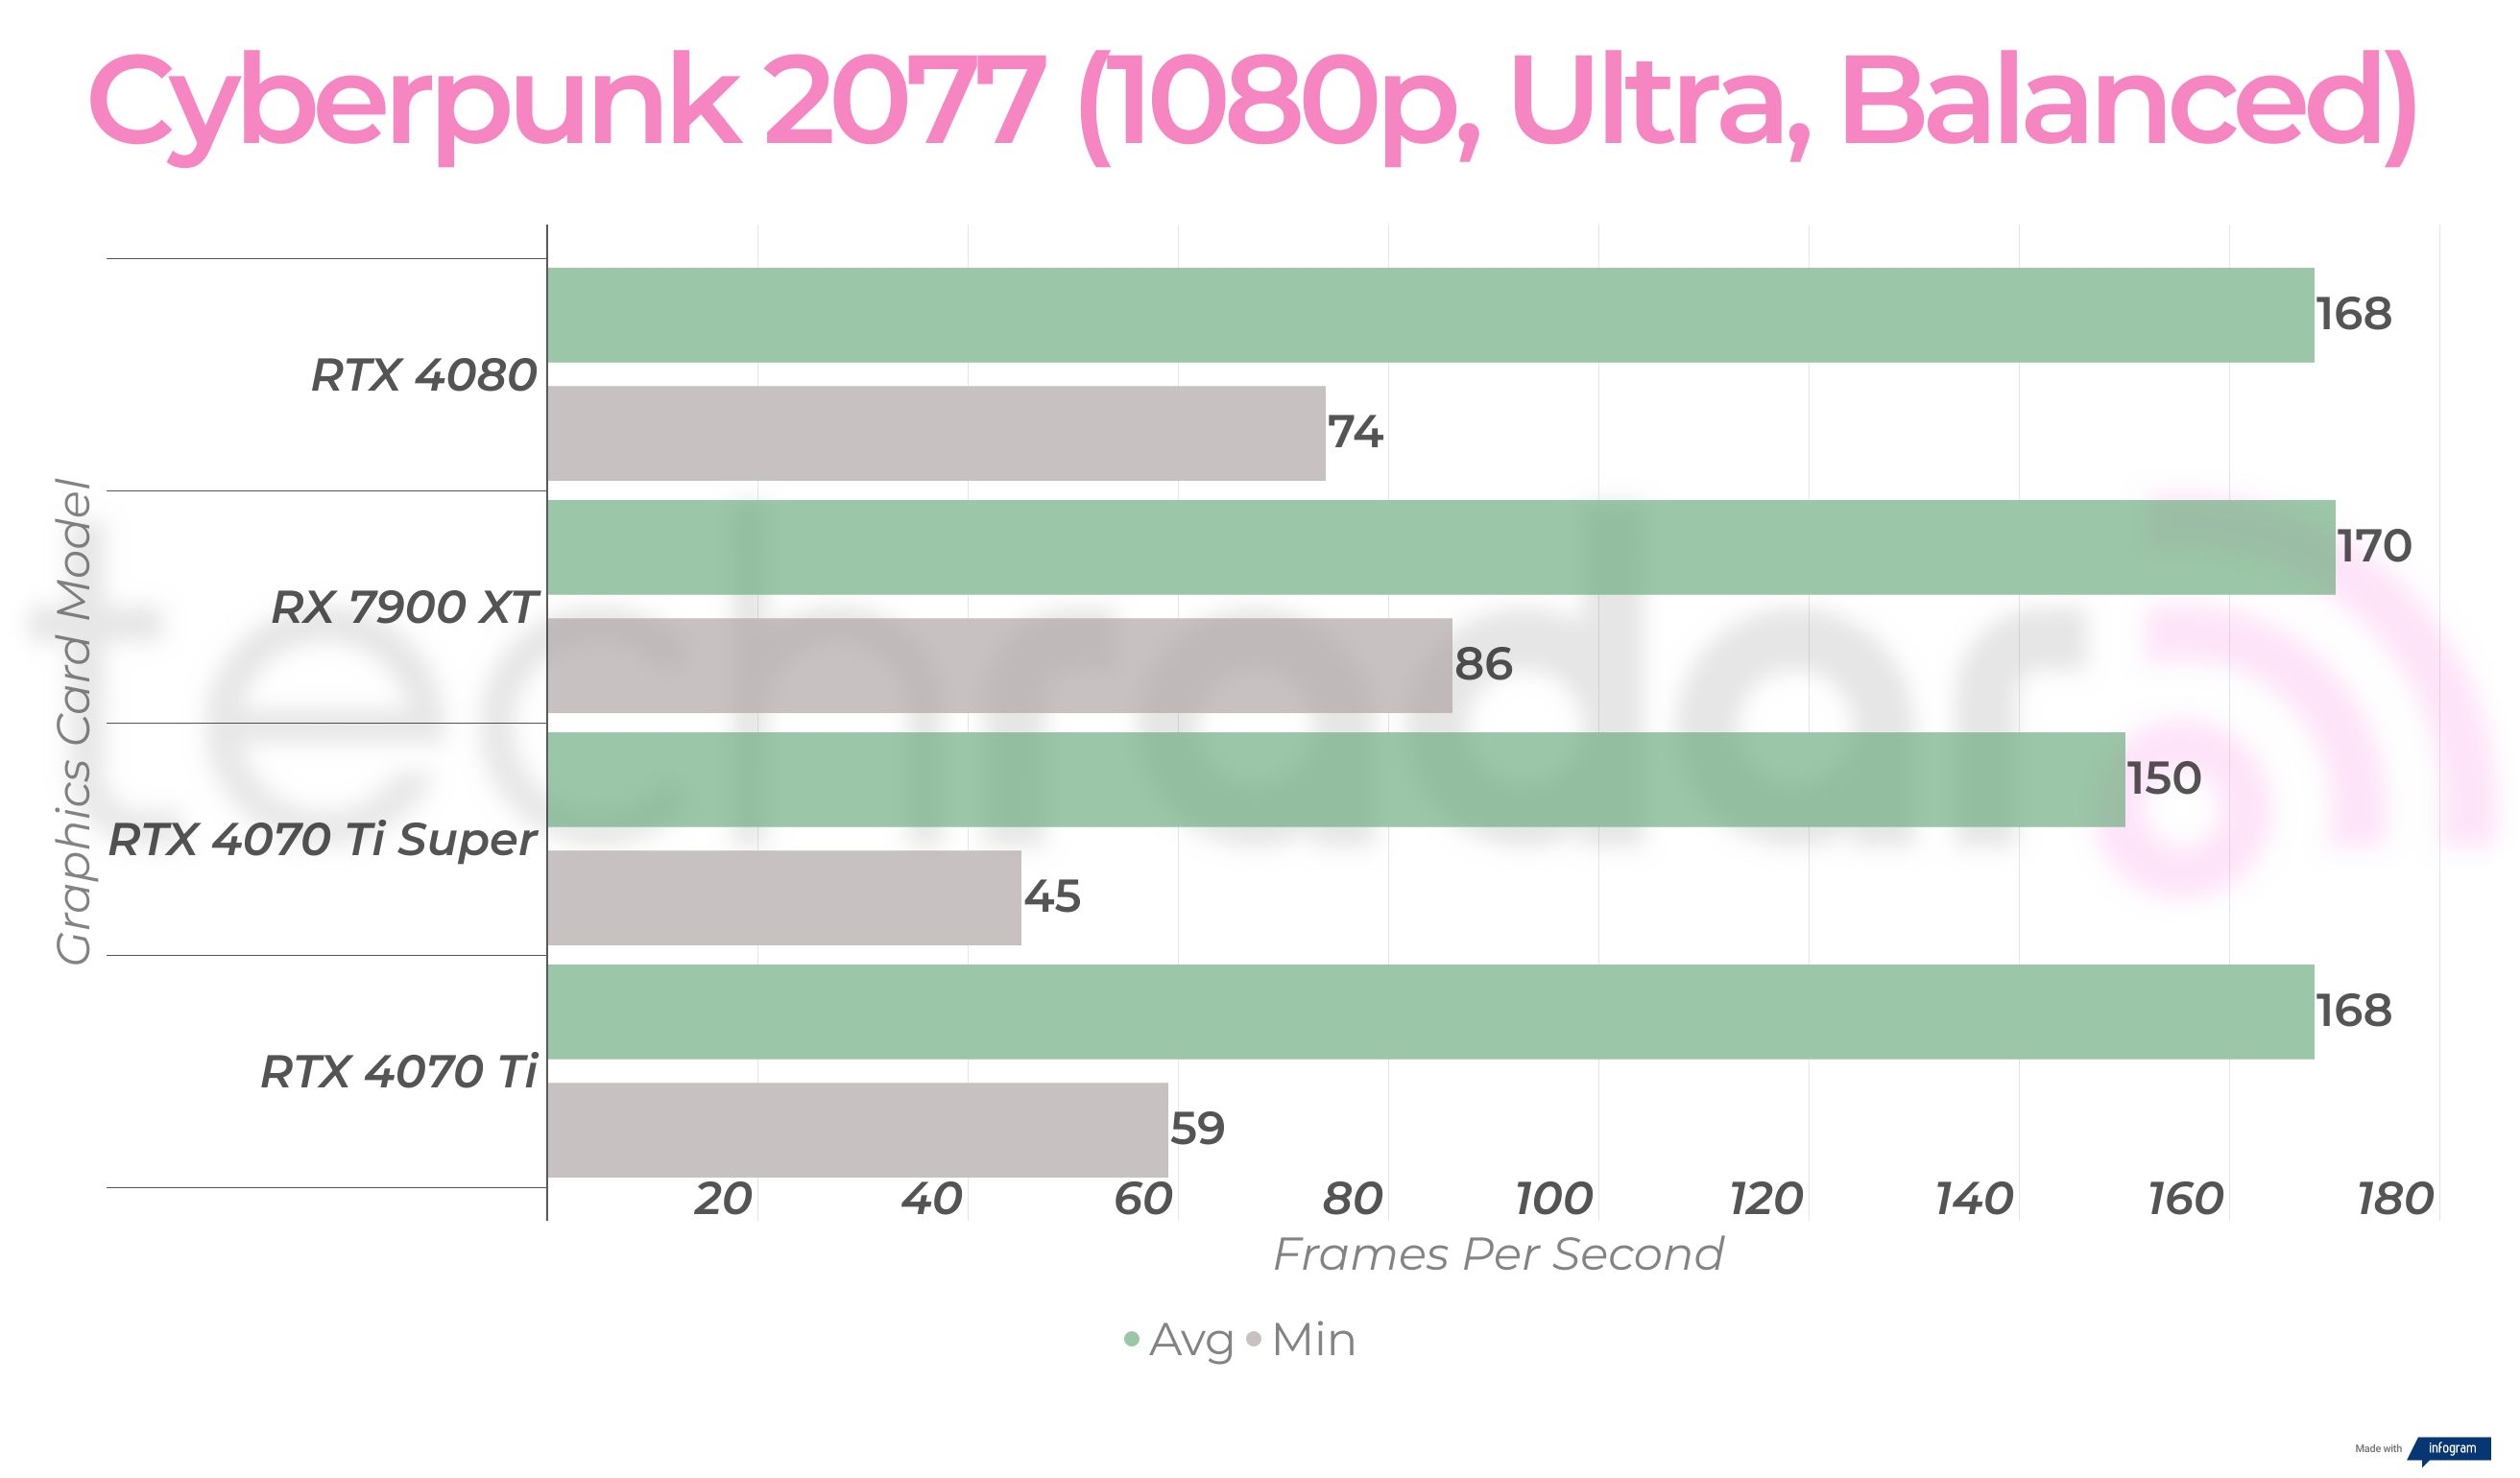 1080p gaming benchmarks for the RTX 4070 Ti Super